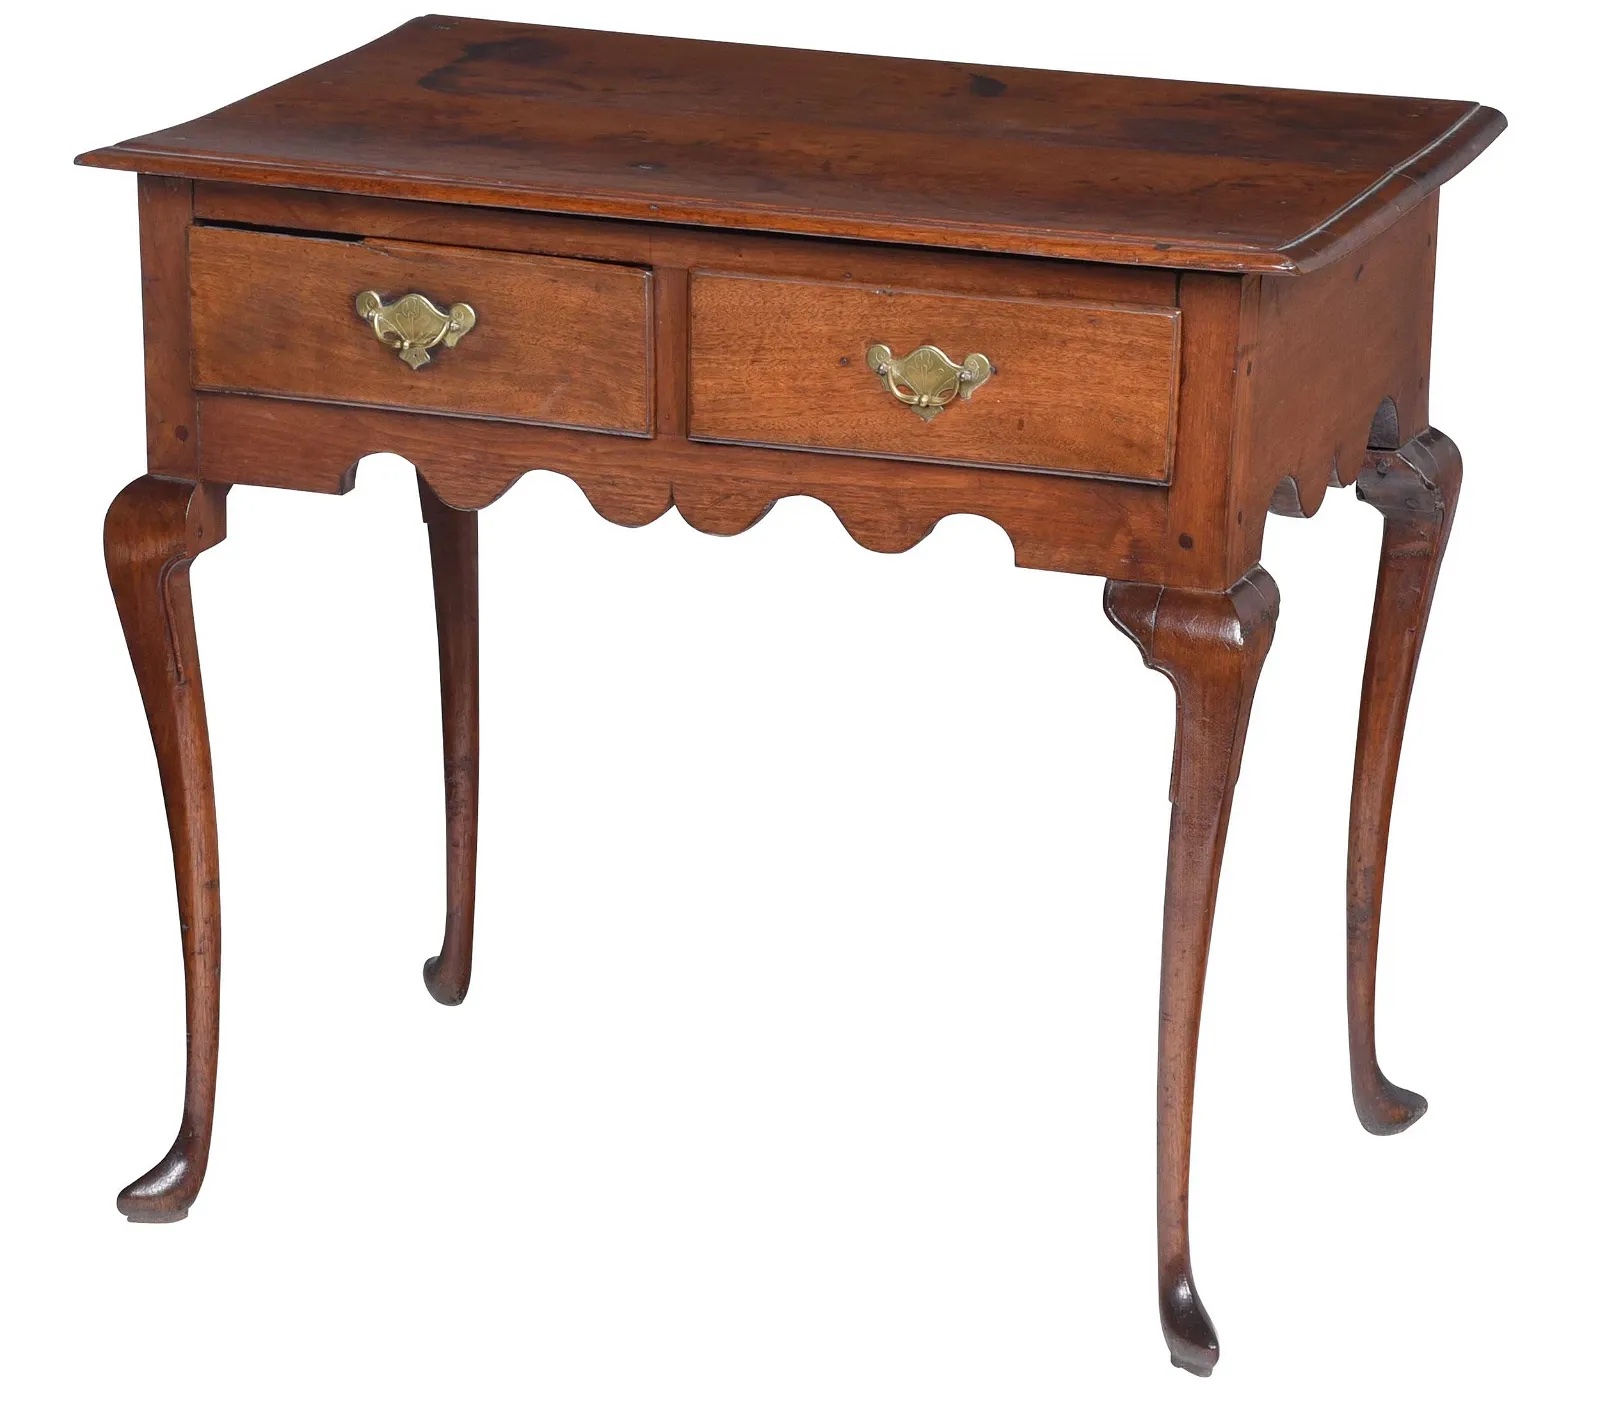 Virginia Chippendale walnut fitted cellaret, estimated at $30,000-$40,000 at Brunk.